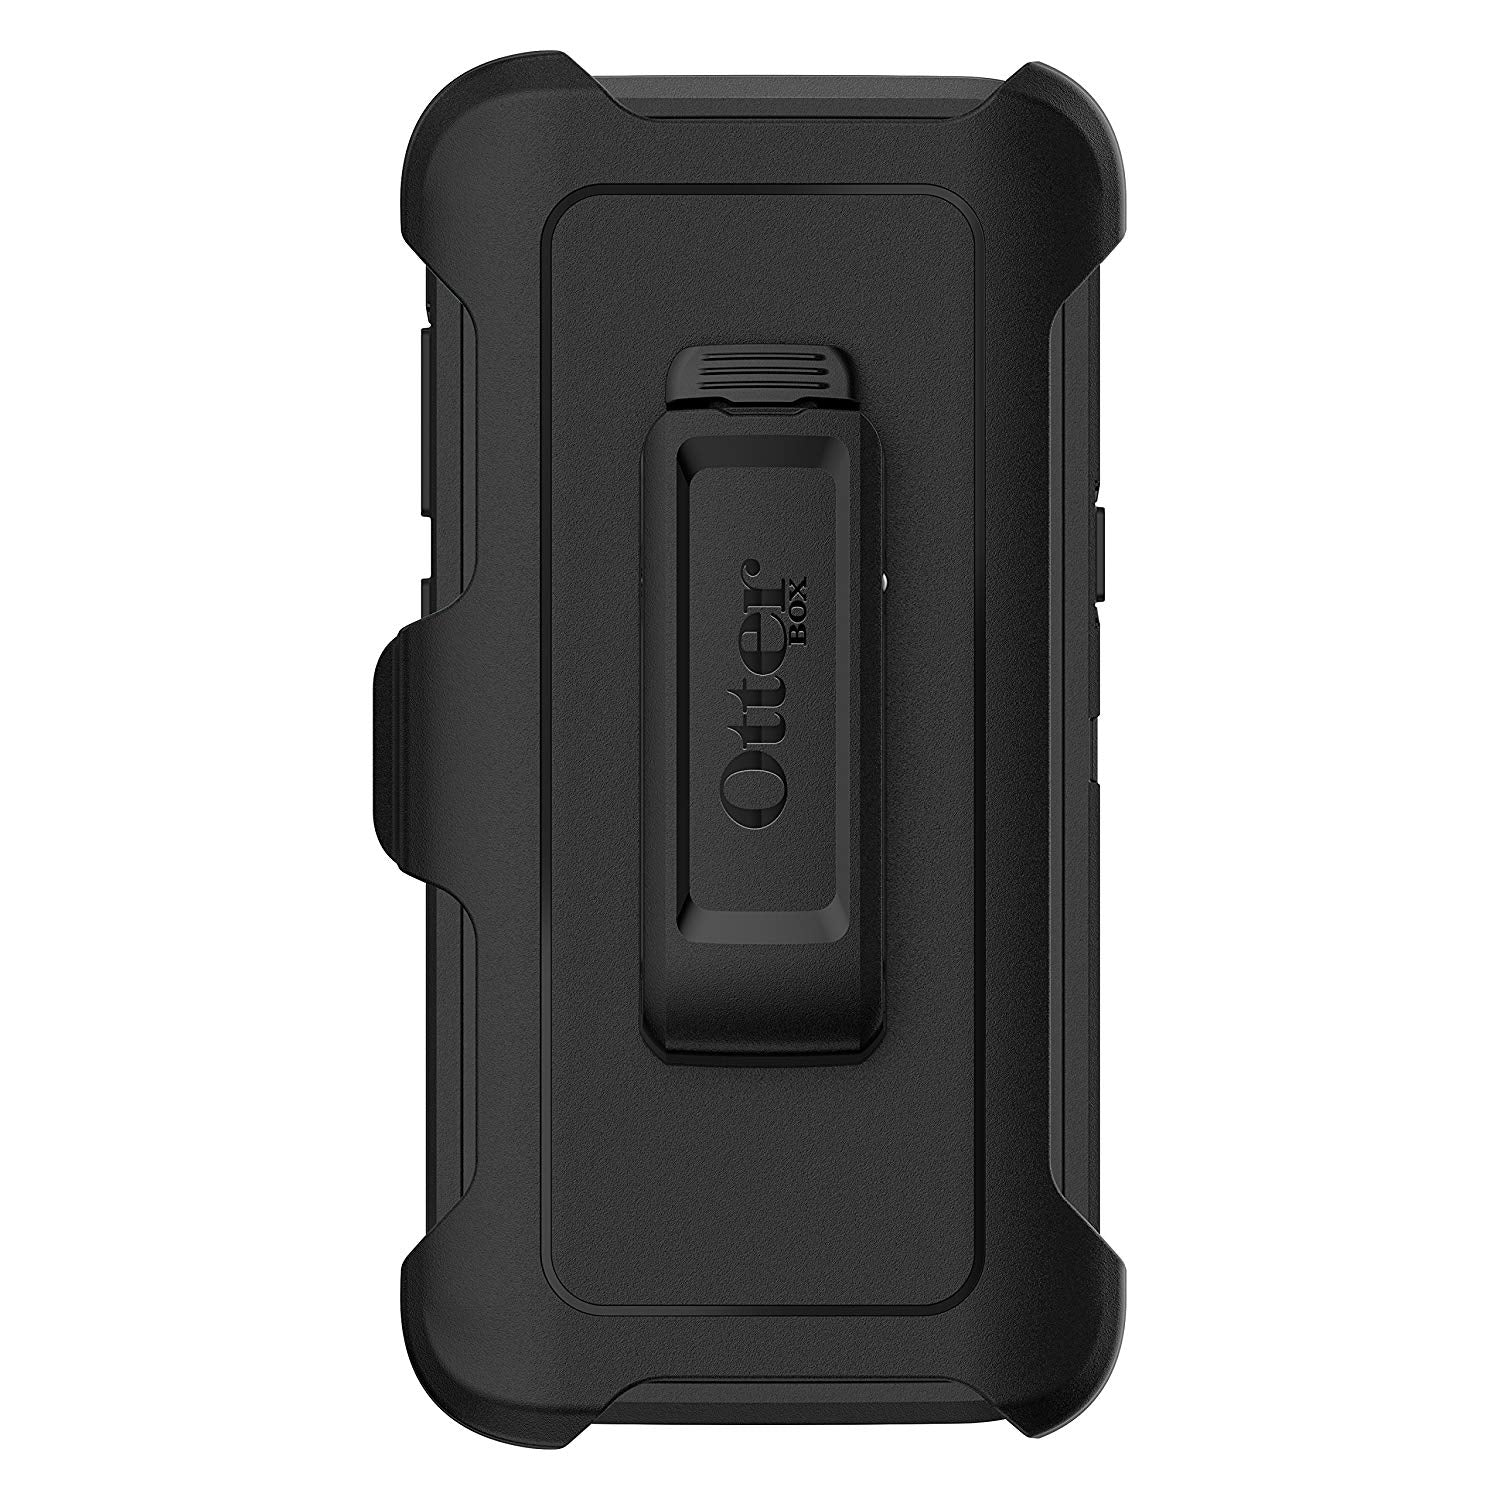 OtterBox DEFENDER SERIES Case for Samsung Galaxy S8 - Black (Certified Refurbished)